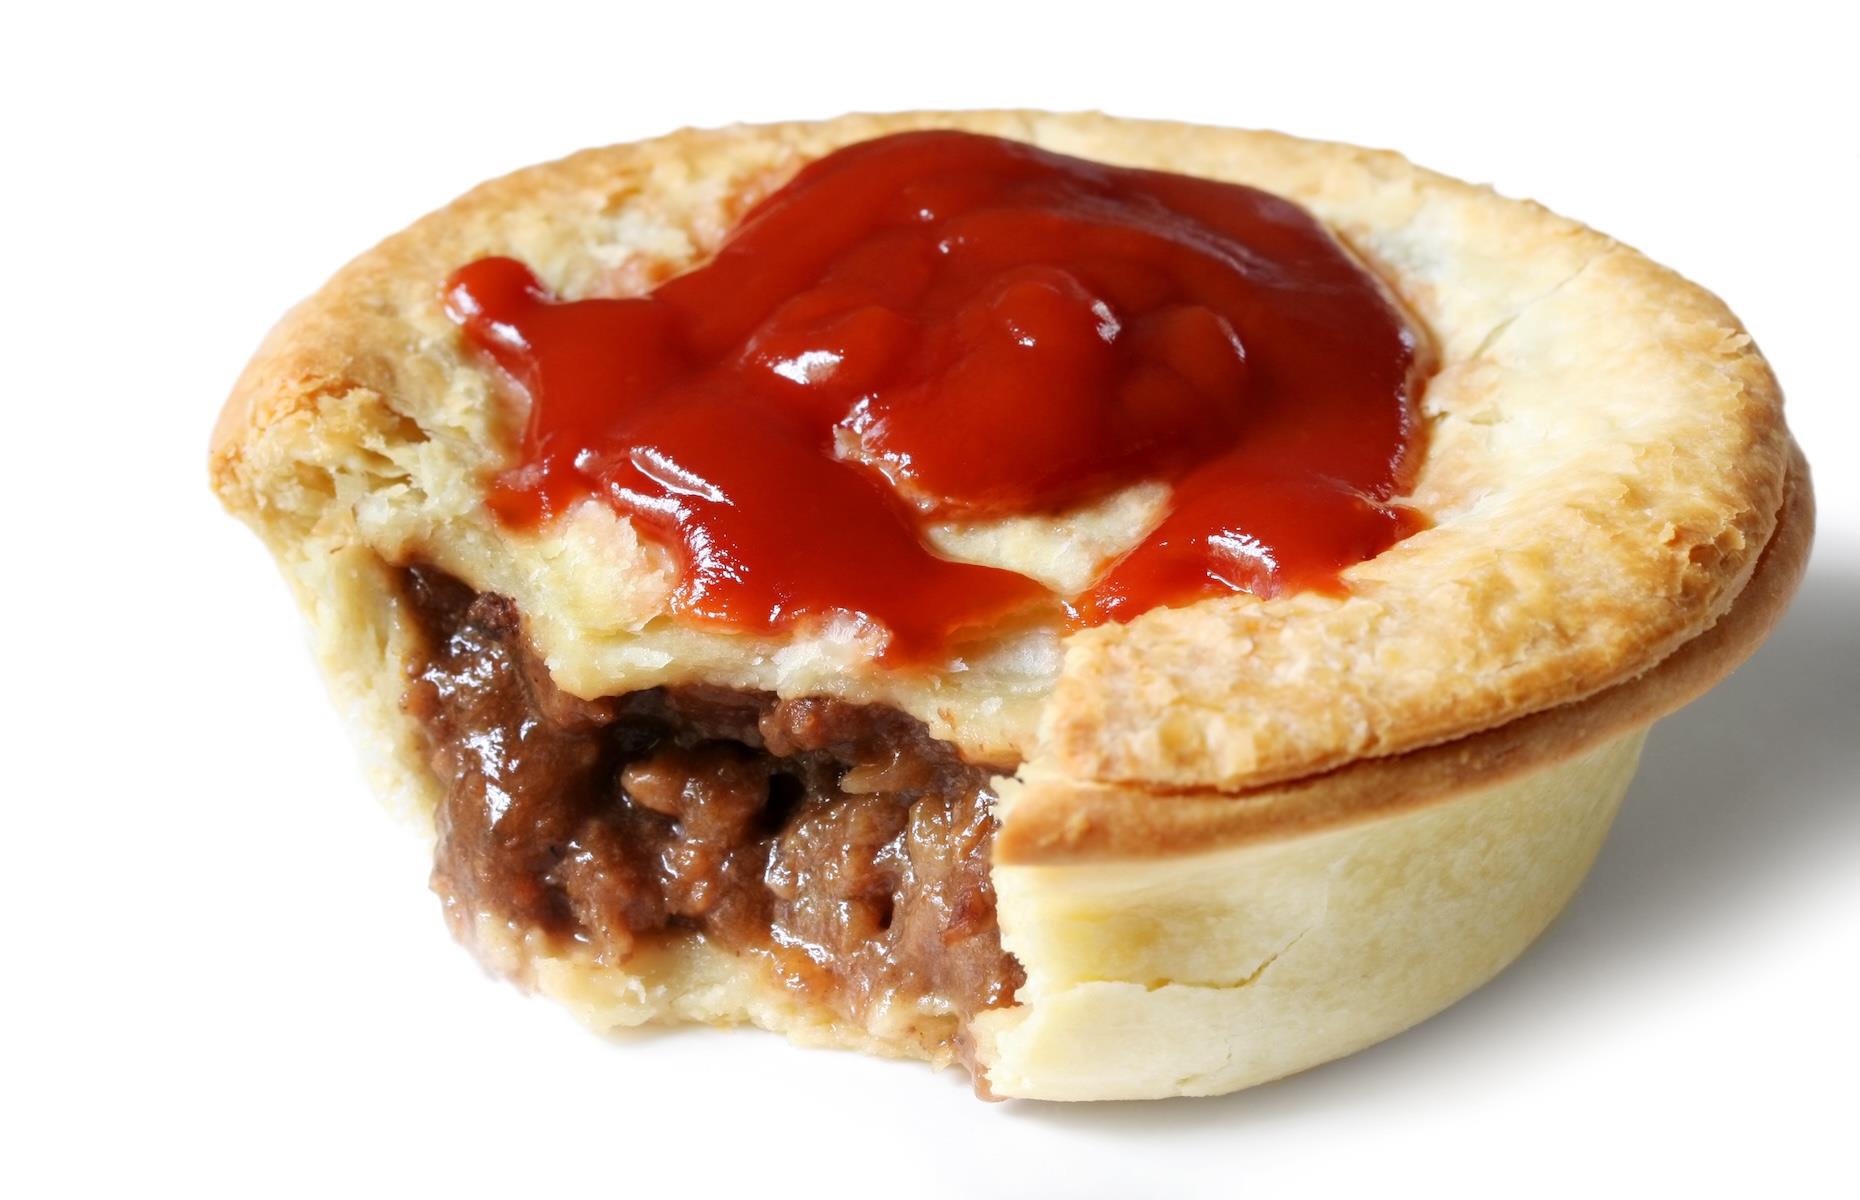 27 delicious foods you’ll ONLY find in Australia